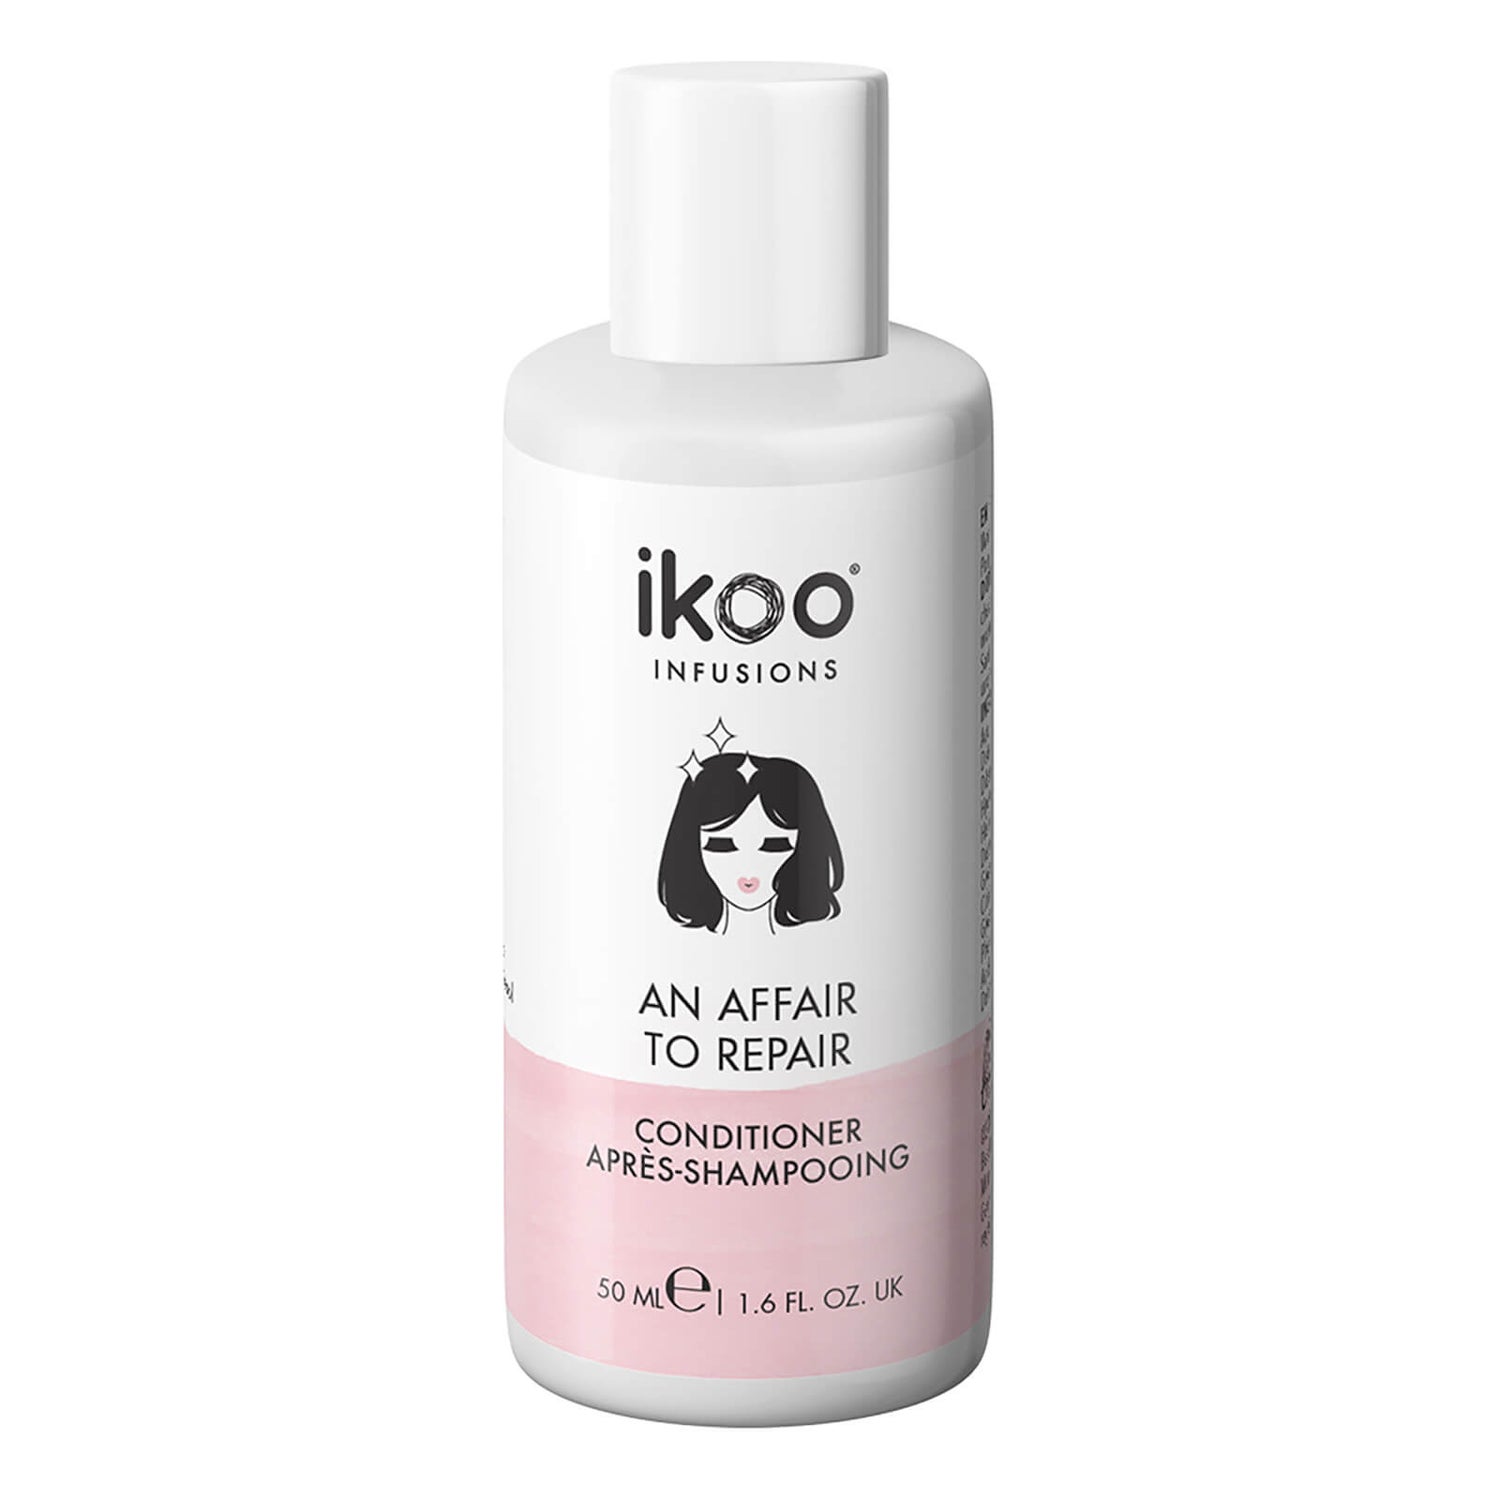 ikoo Conditioner - An Affair to Repair 50ml